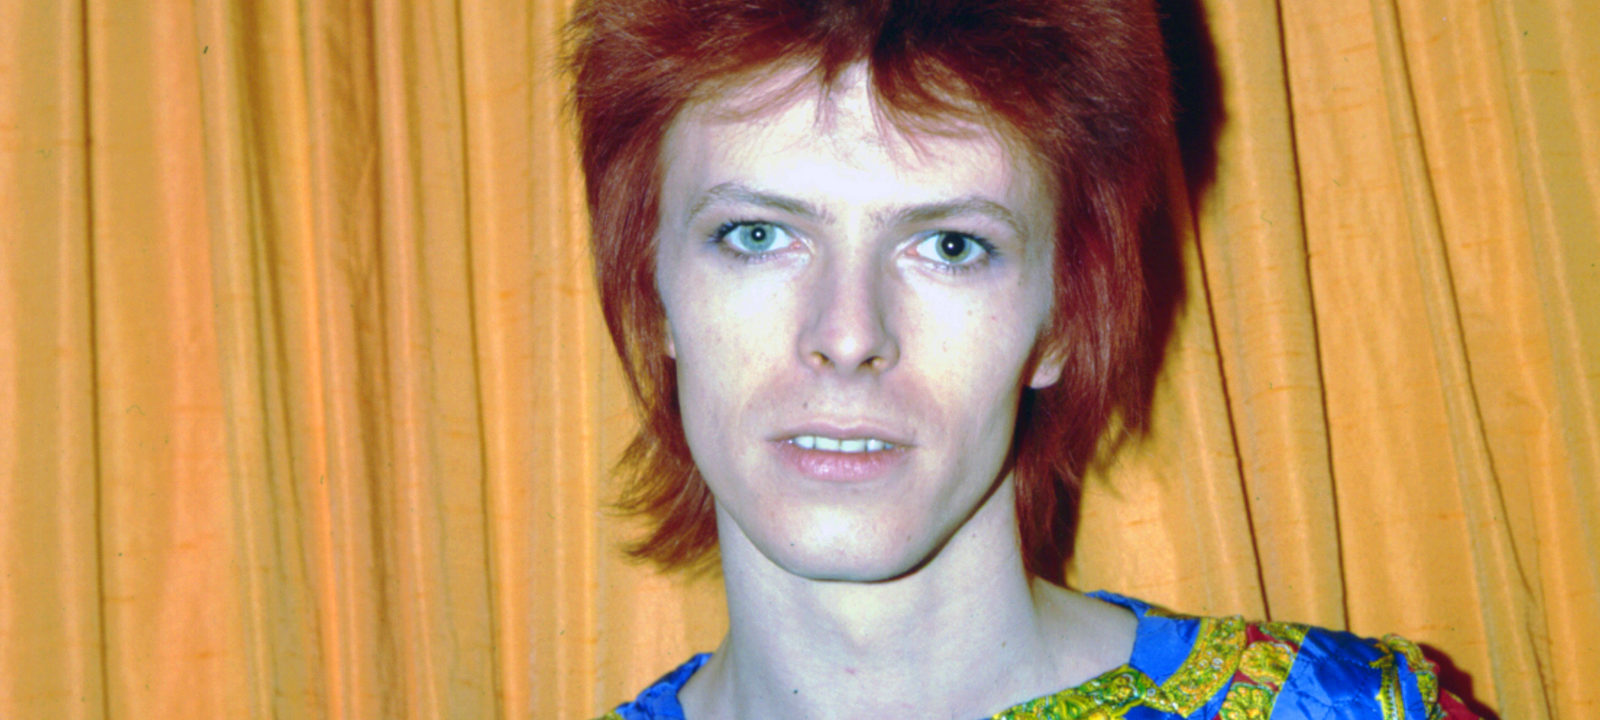 David Bowie Biopic Gets a Greenlight, Despite Family’s Objections ...